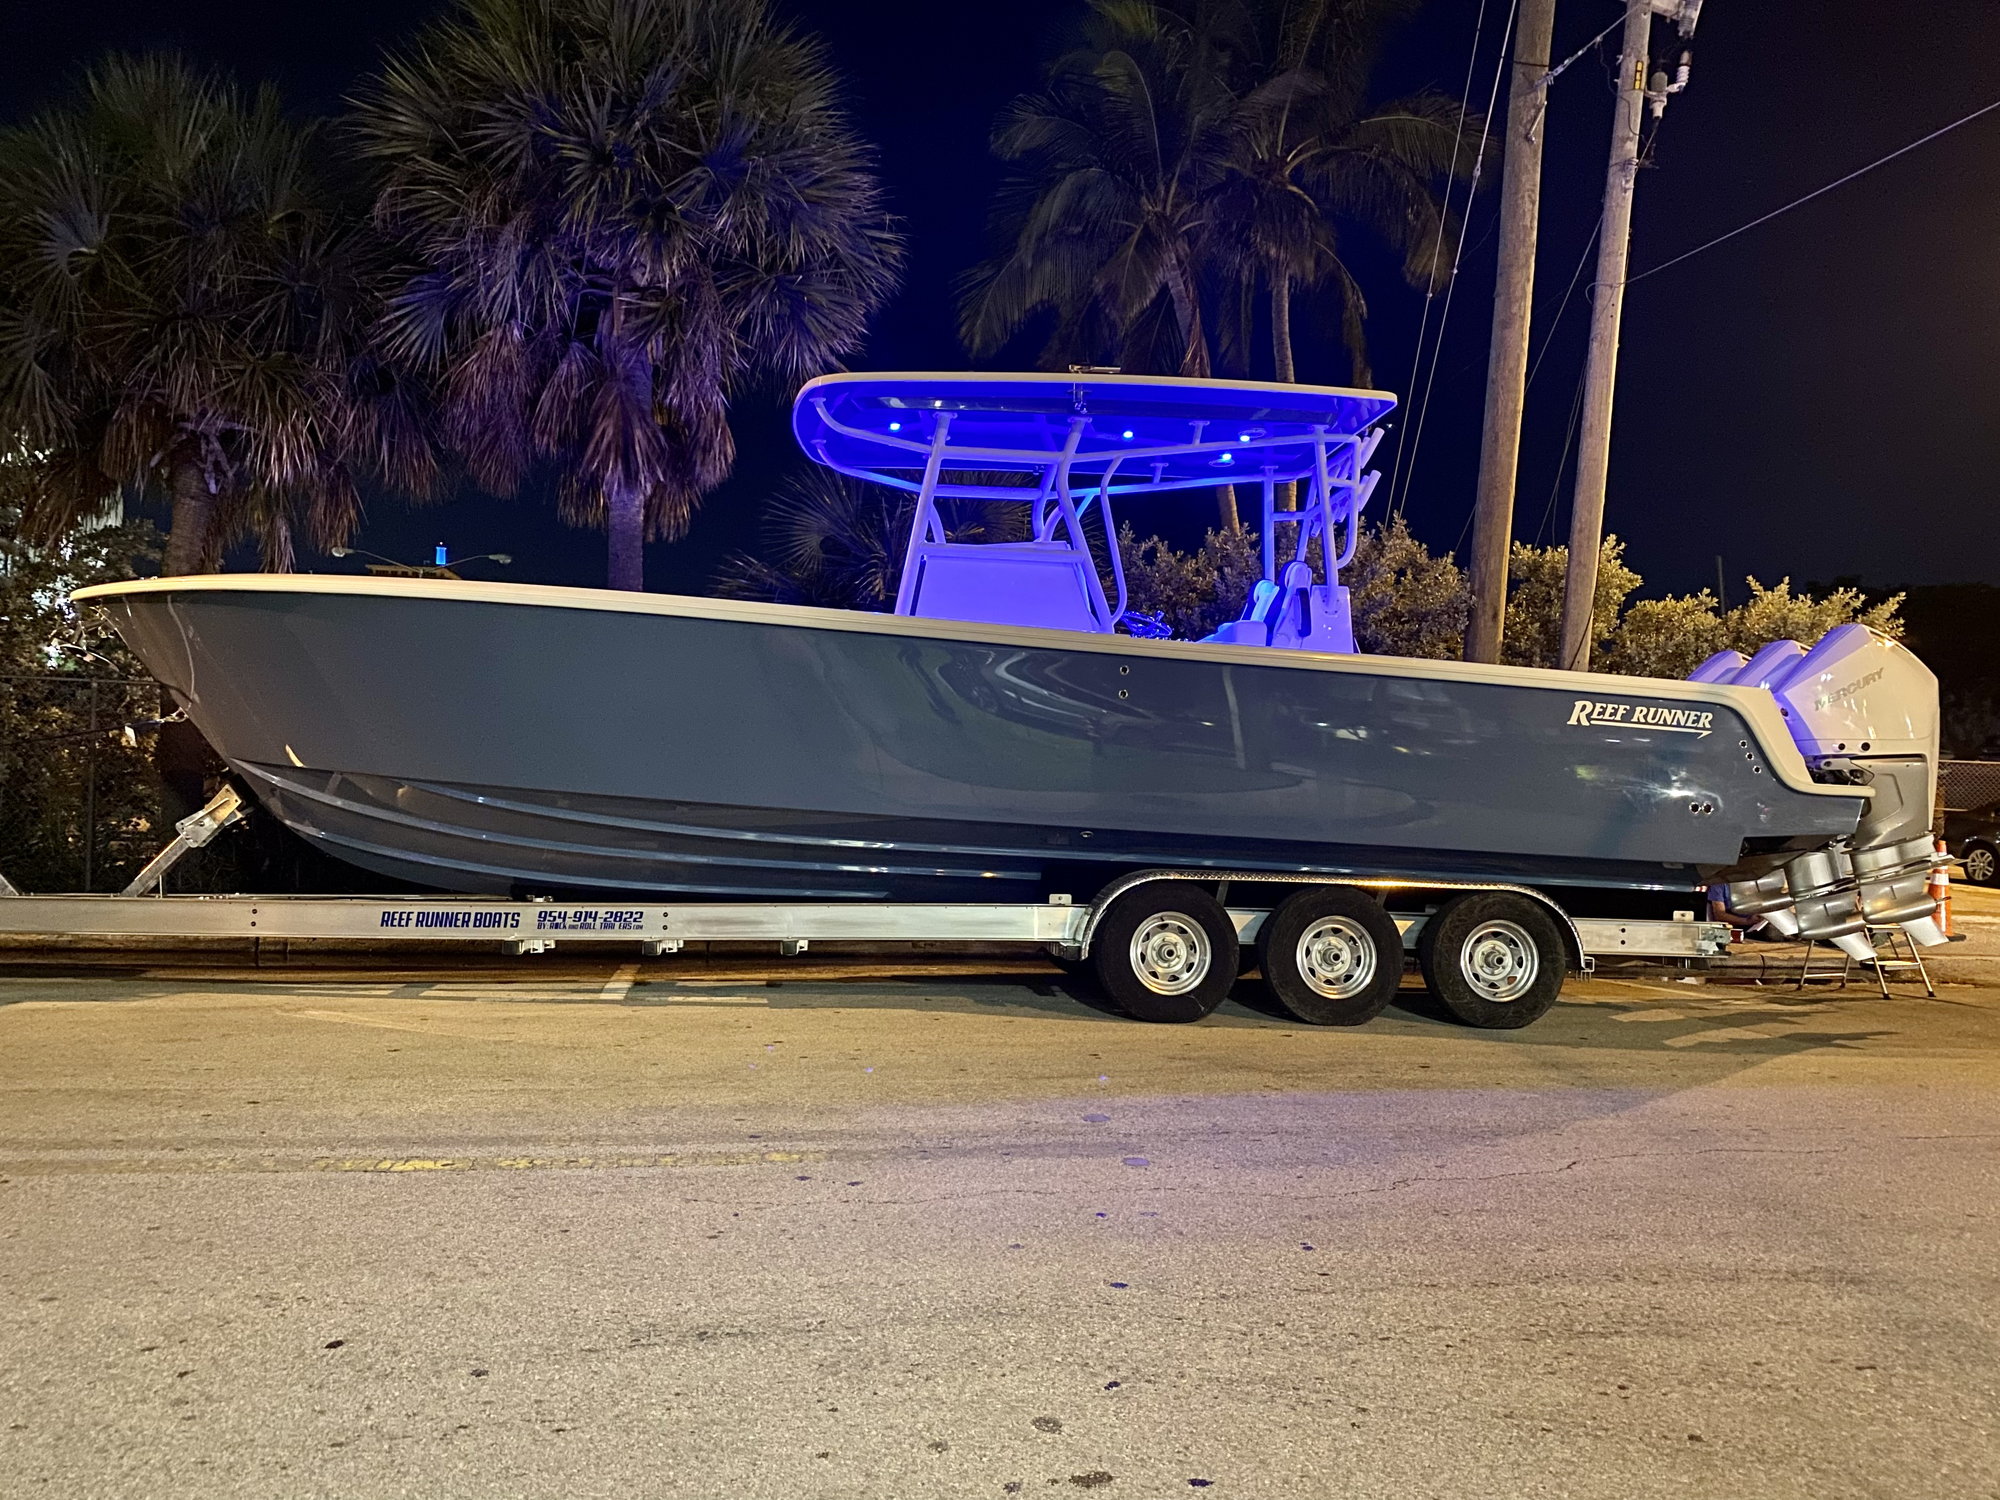 Reef Runner Boats 340 CC - Page 17 - The Hull Truth - Boating and